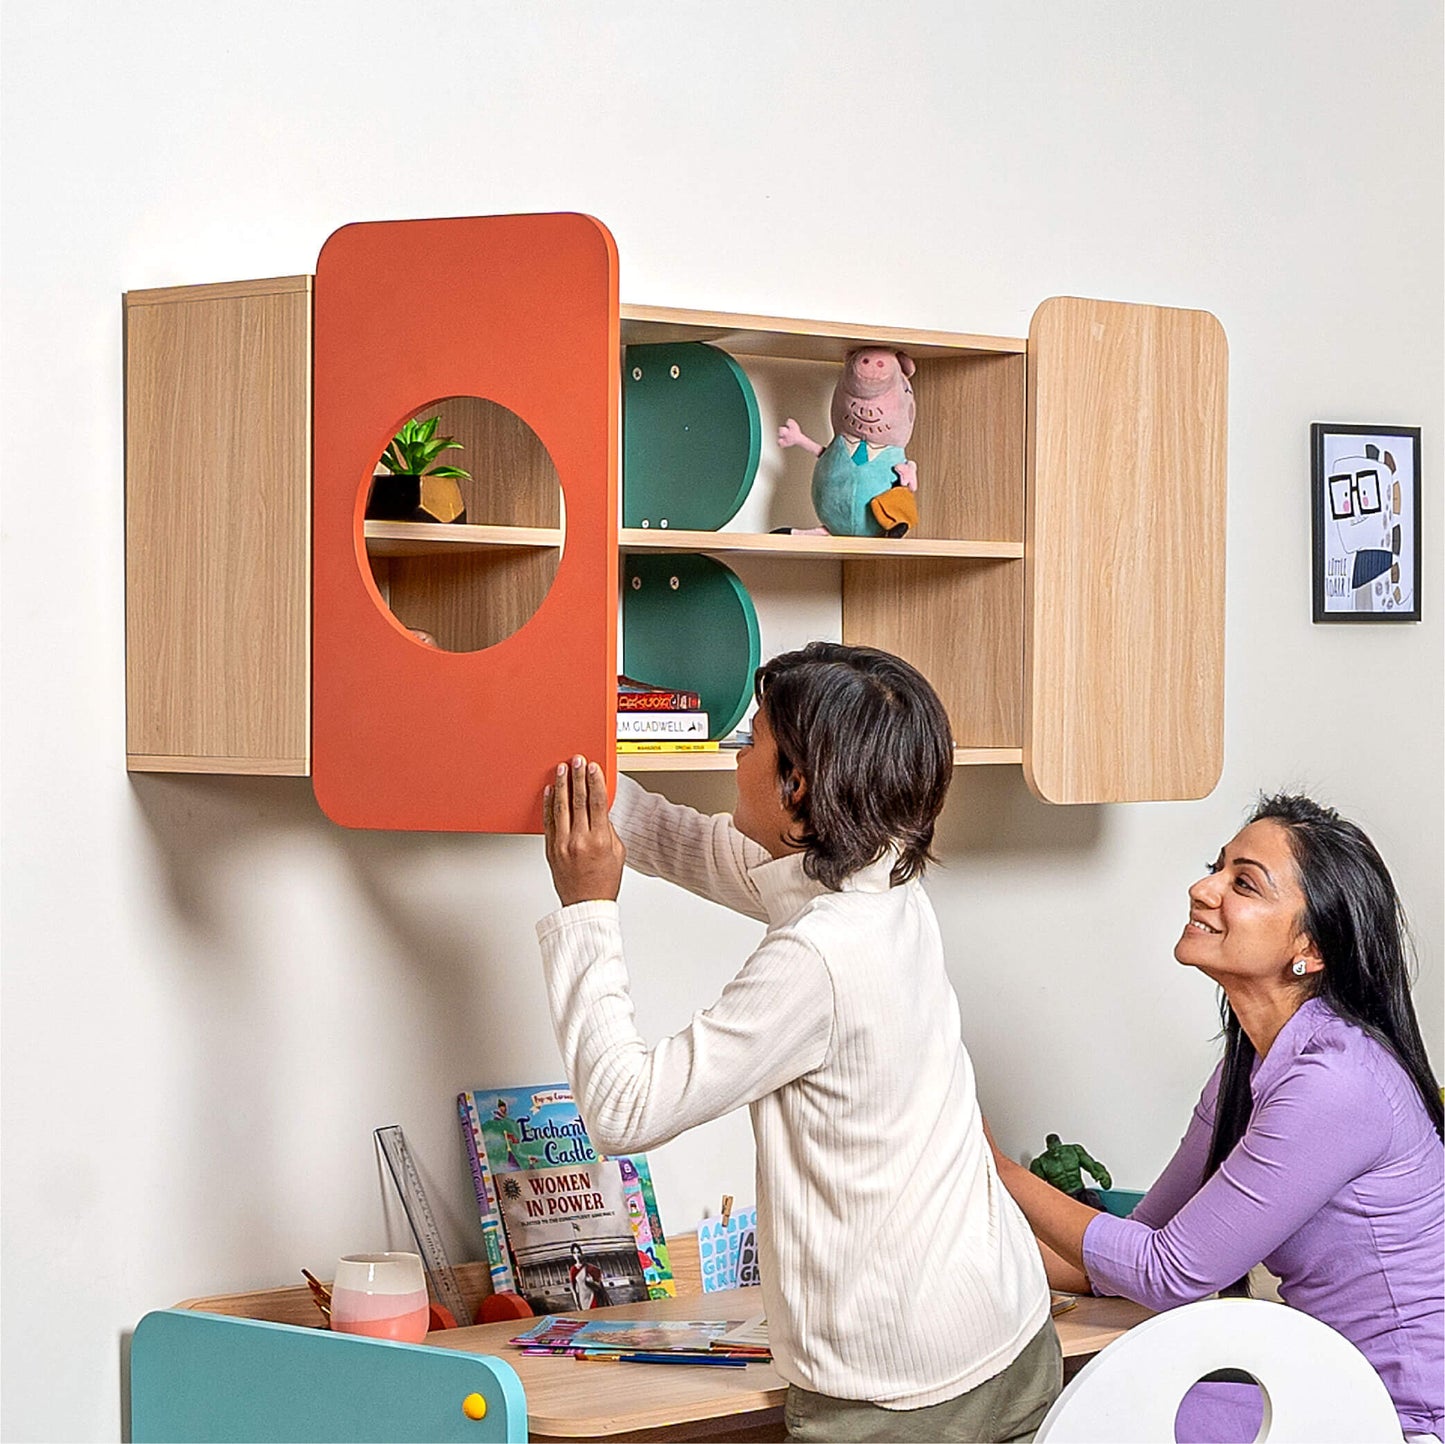 Ludo Wall Shelves and Cabinets